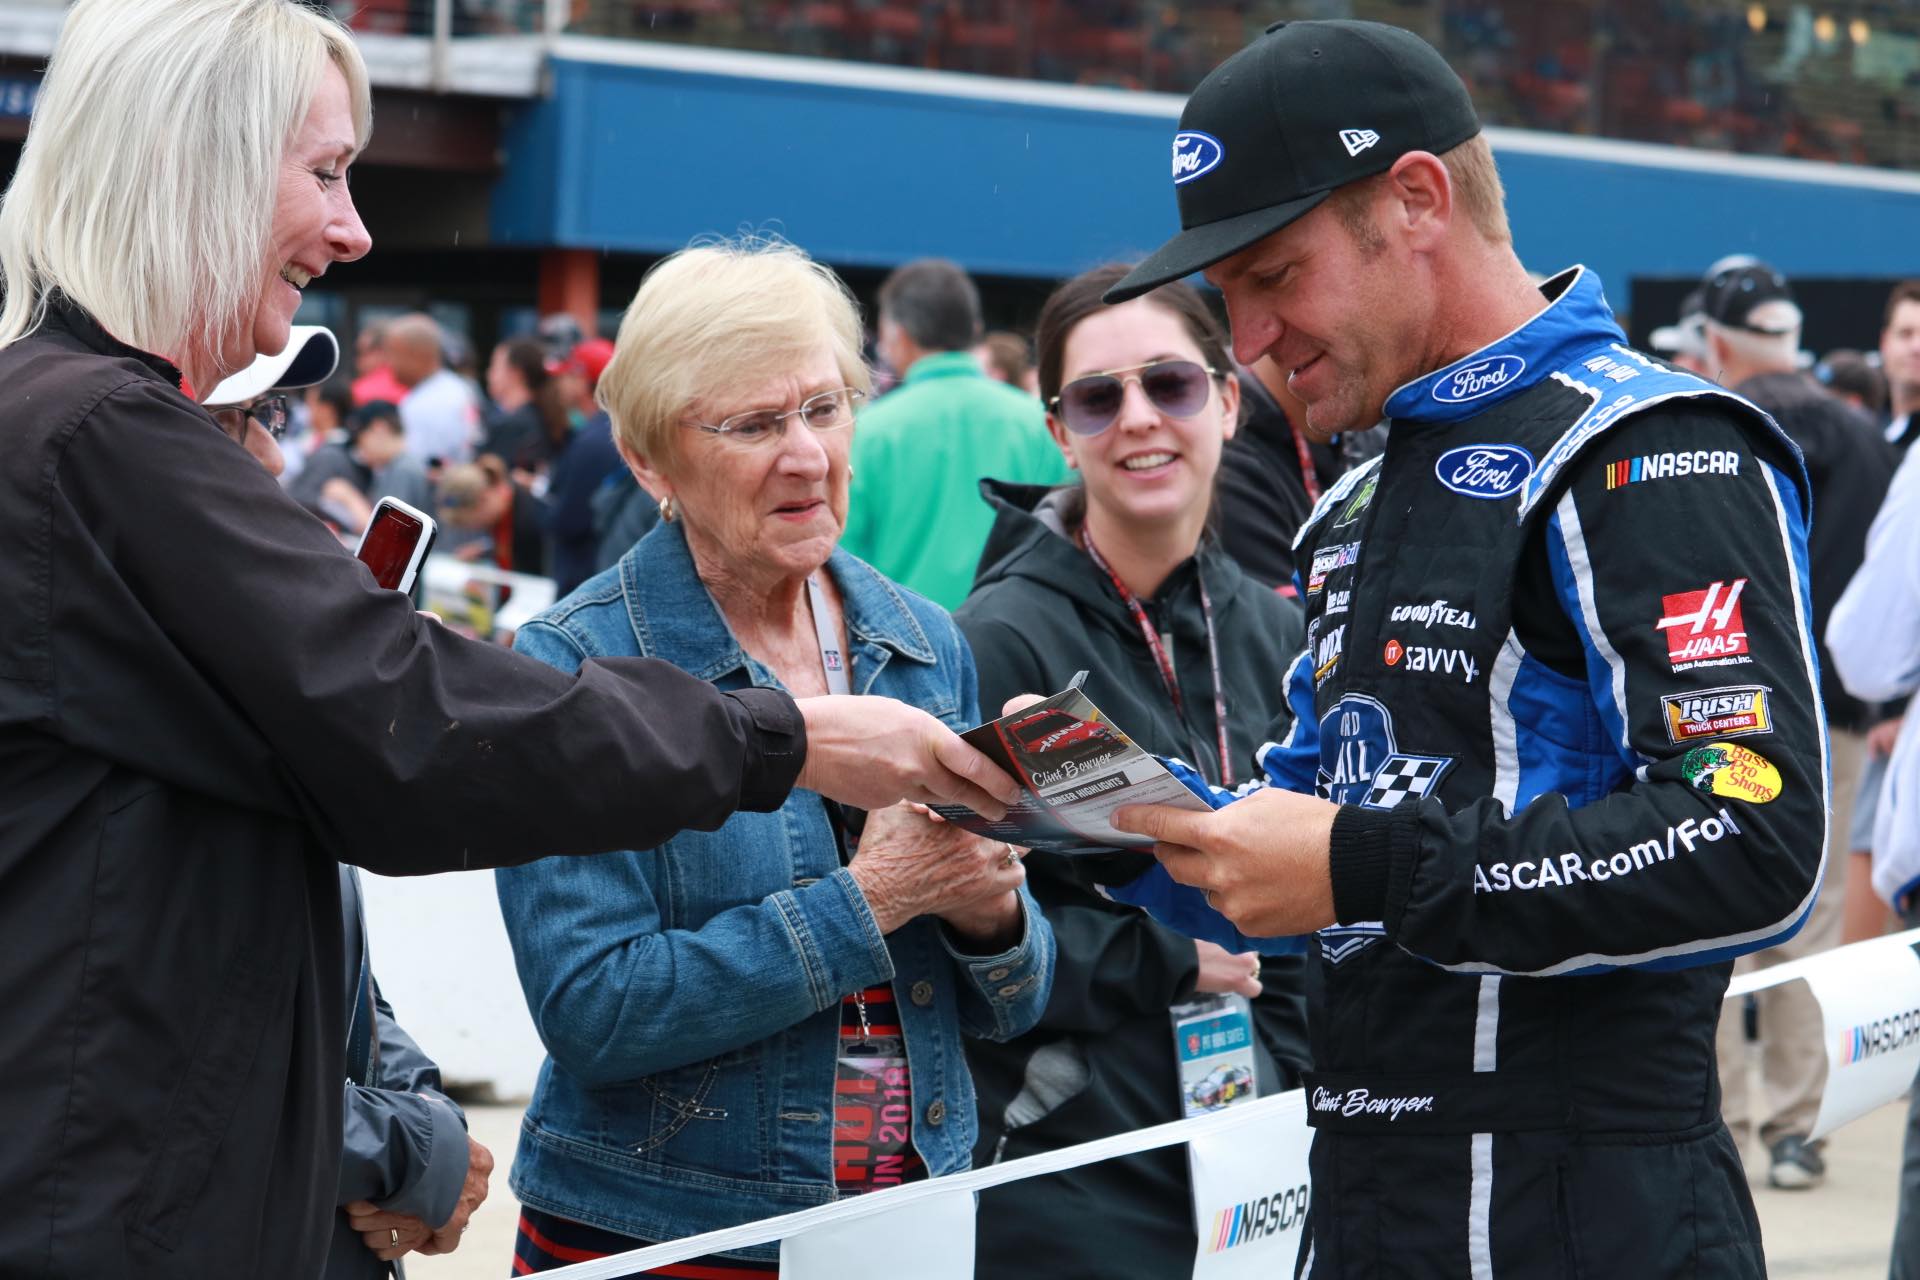 Connecting with fans still counts in today's NASCAR. (Photo Credit: Kathleen Cassidy/TPF)